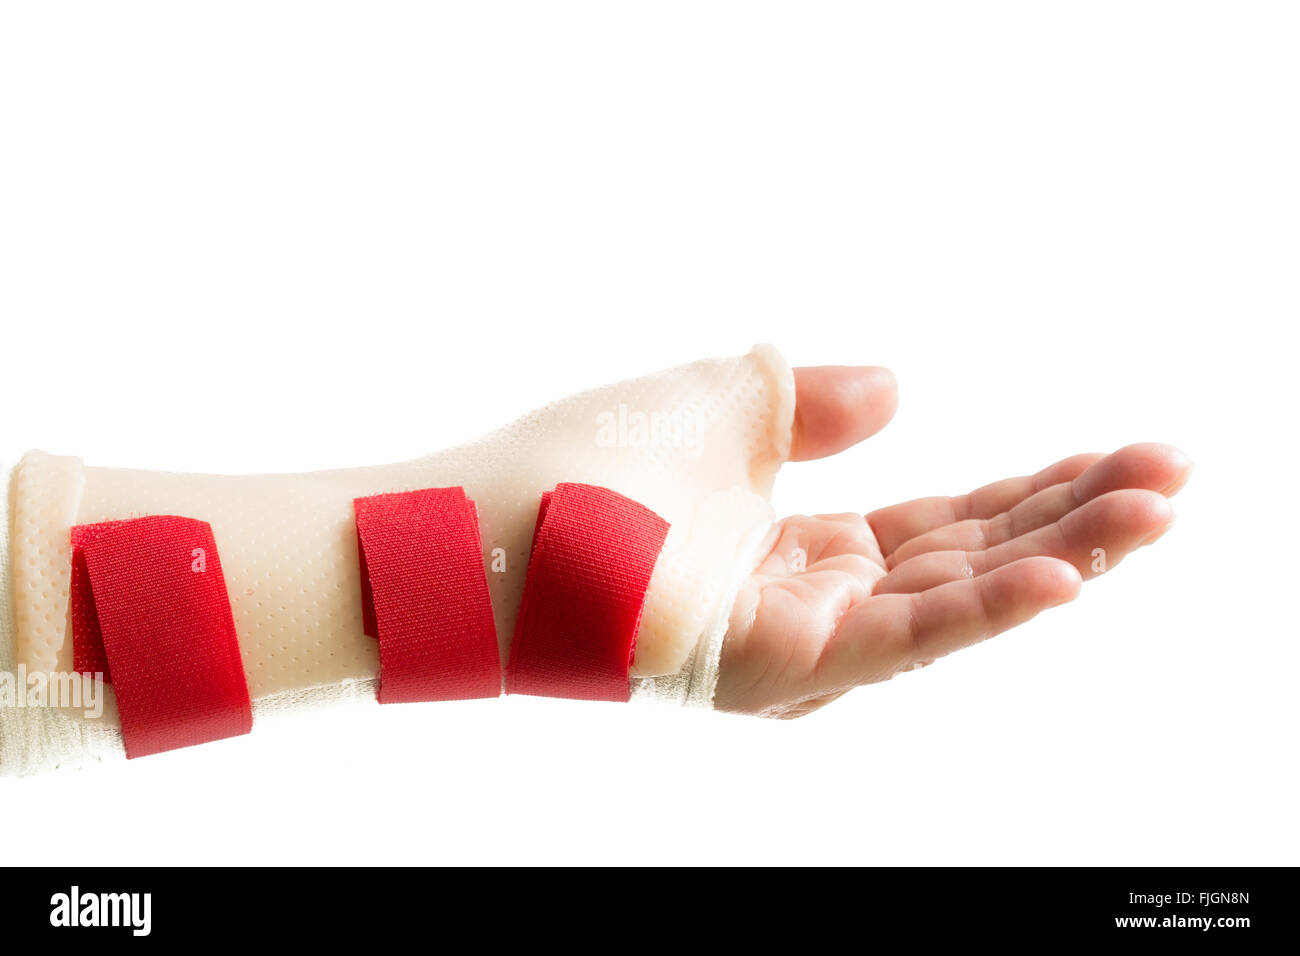 Bandaged hand Cut Out Stock Images & Pictures - Alamy